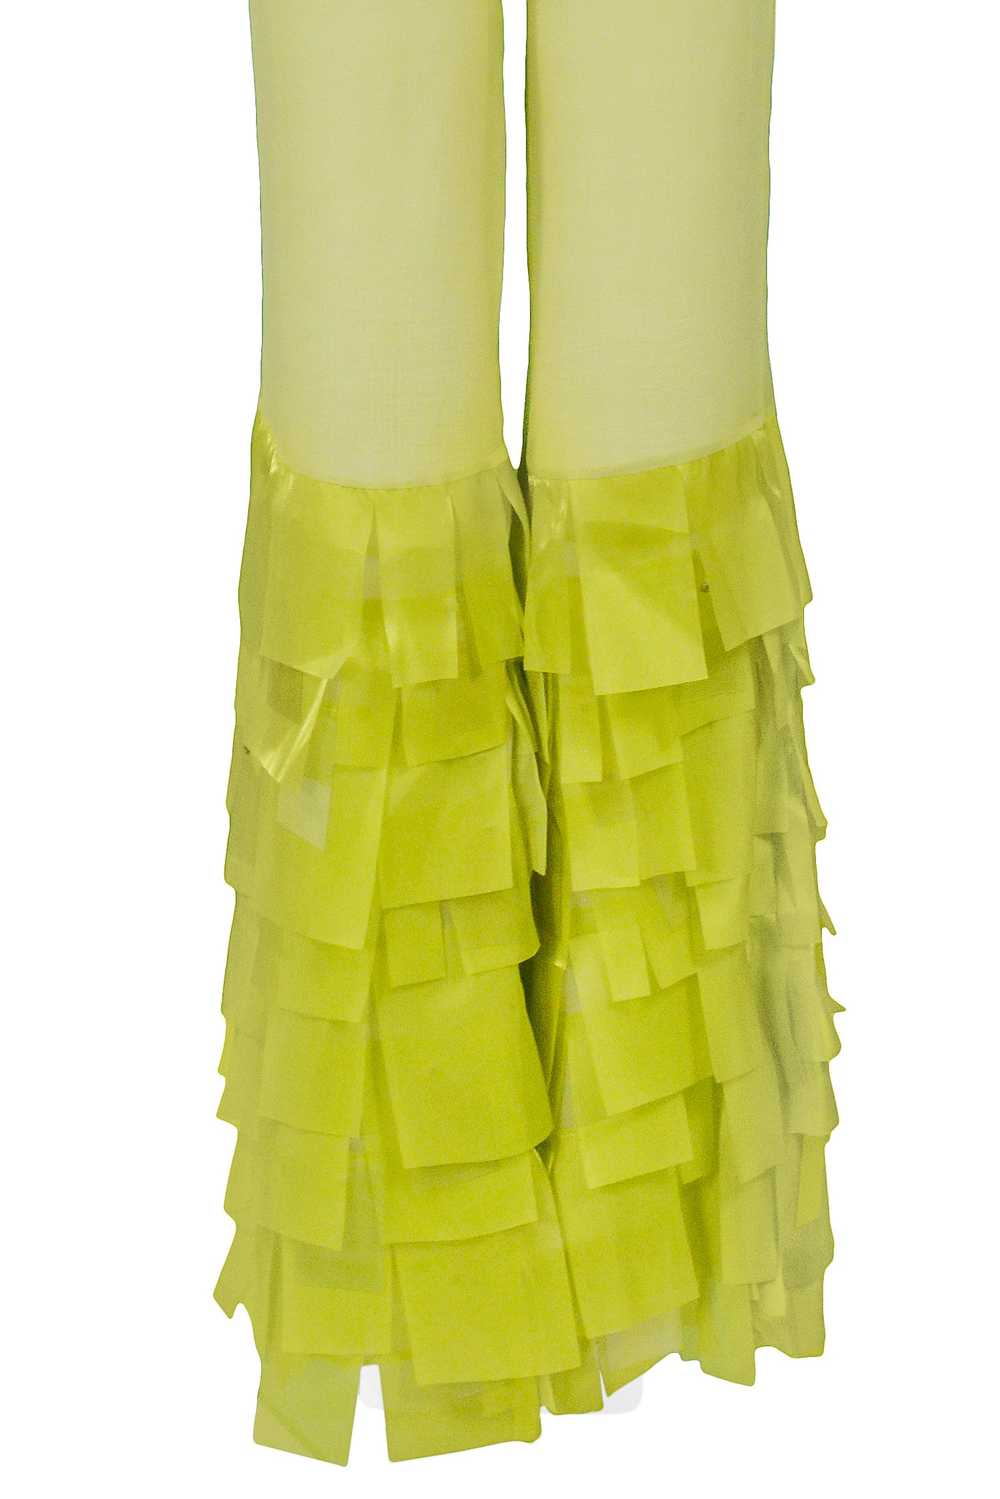 PACO CHARTREUSE GREEN TEXTURED TOP & BELL BOTTOM … - image 6